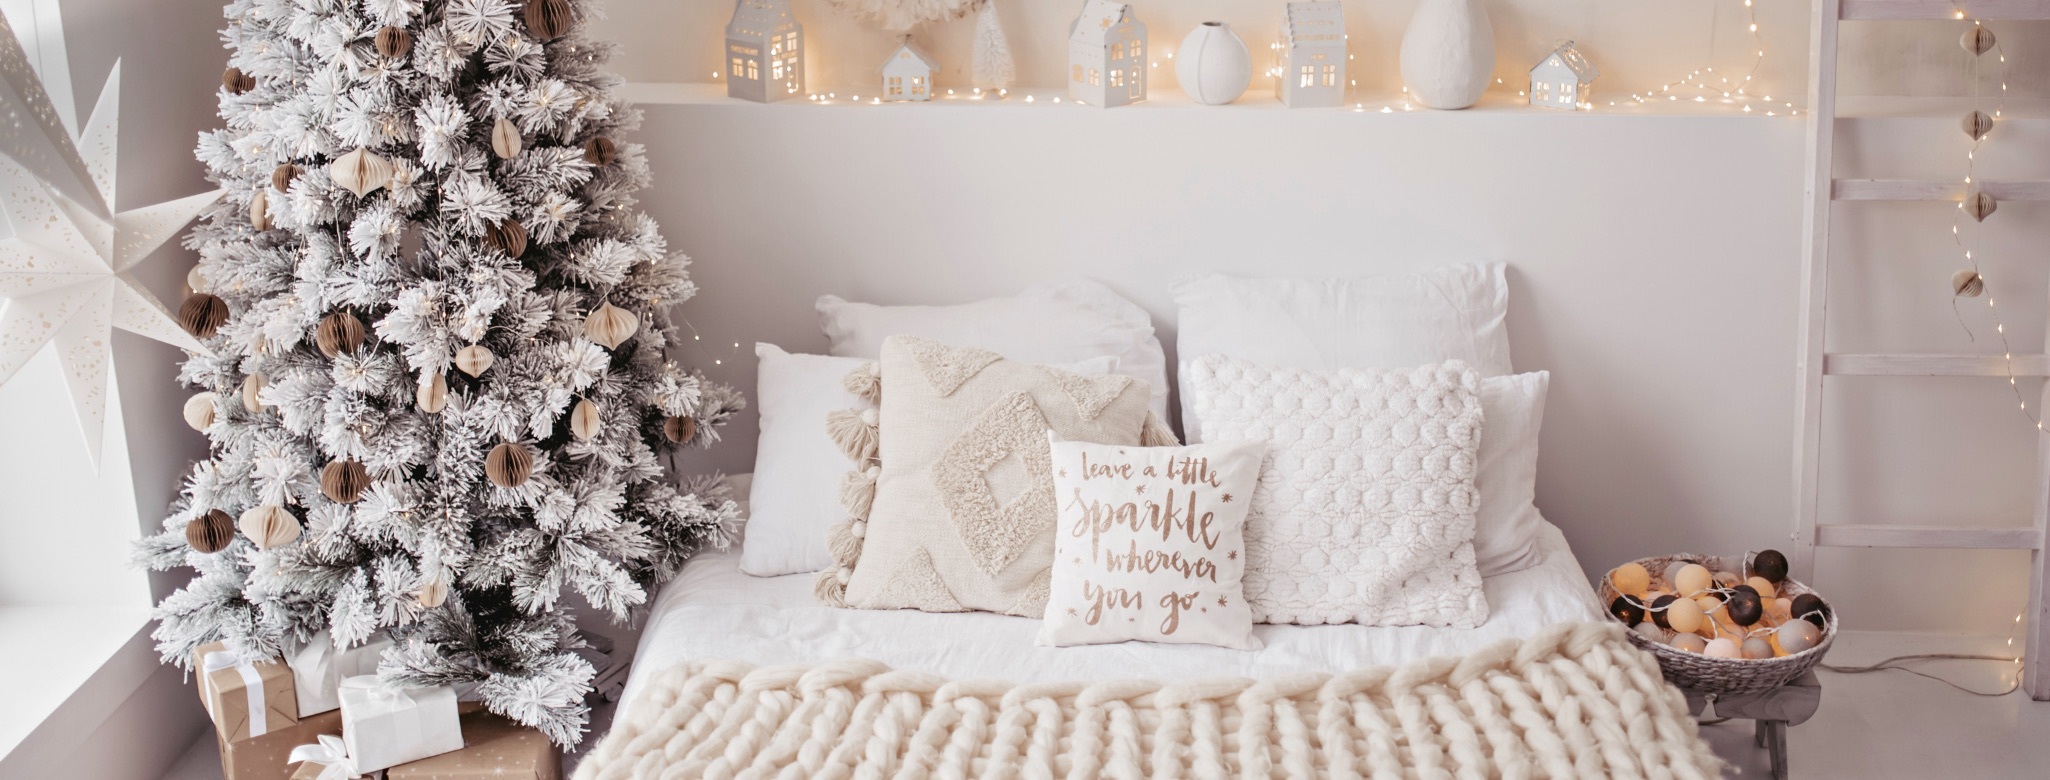 Photo of bedroom decorated with a christmas tree and layers of white and cream on the bed with festive pillows for holiday decorating tips